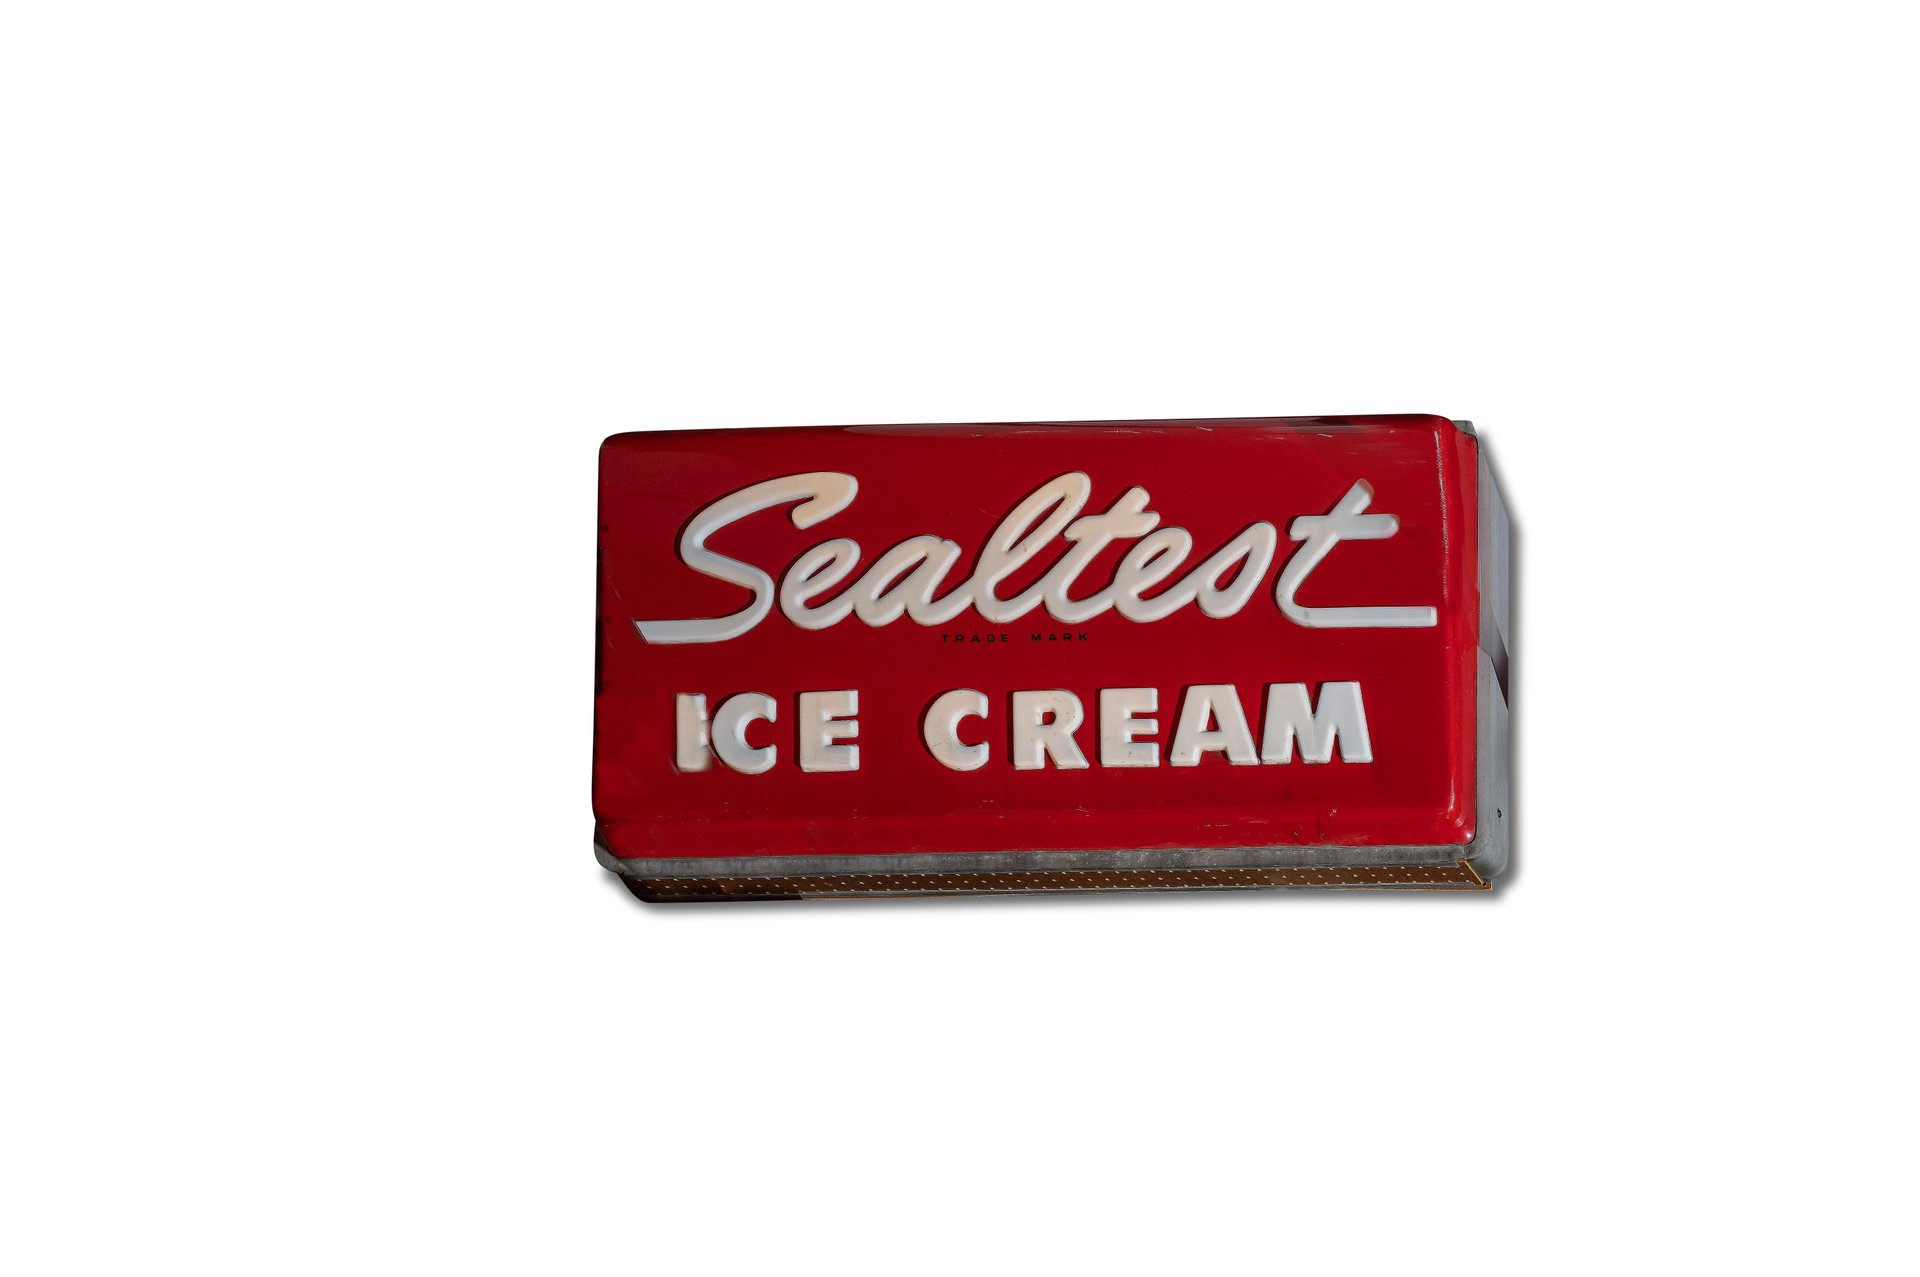 For Sale 'Sealtest Ice Cream' Lighted Sign